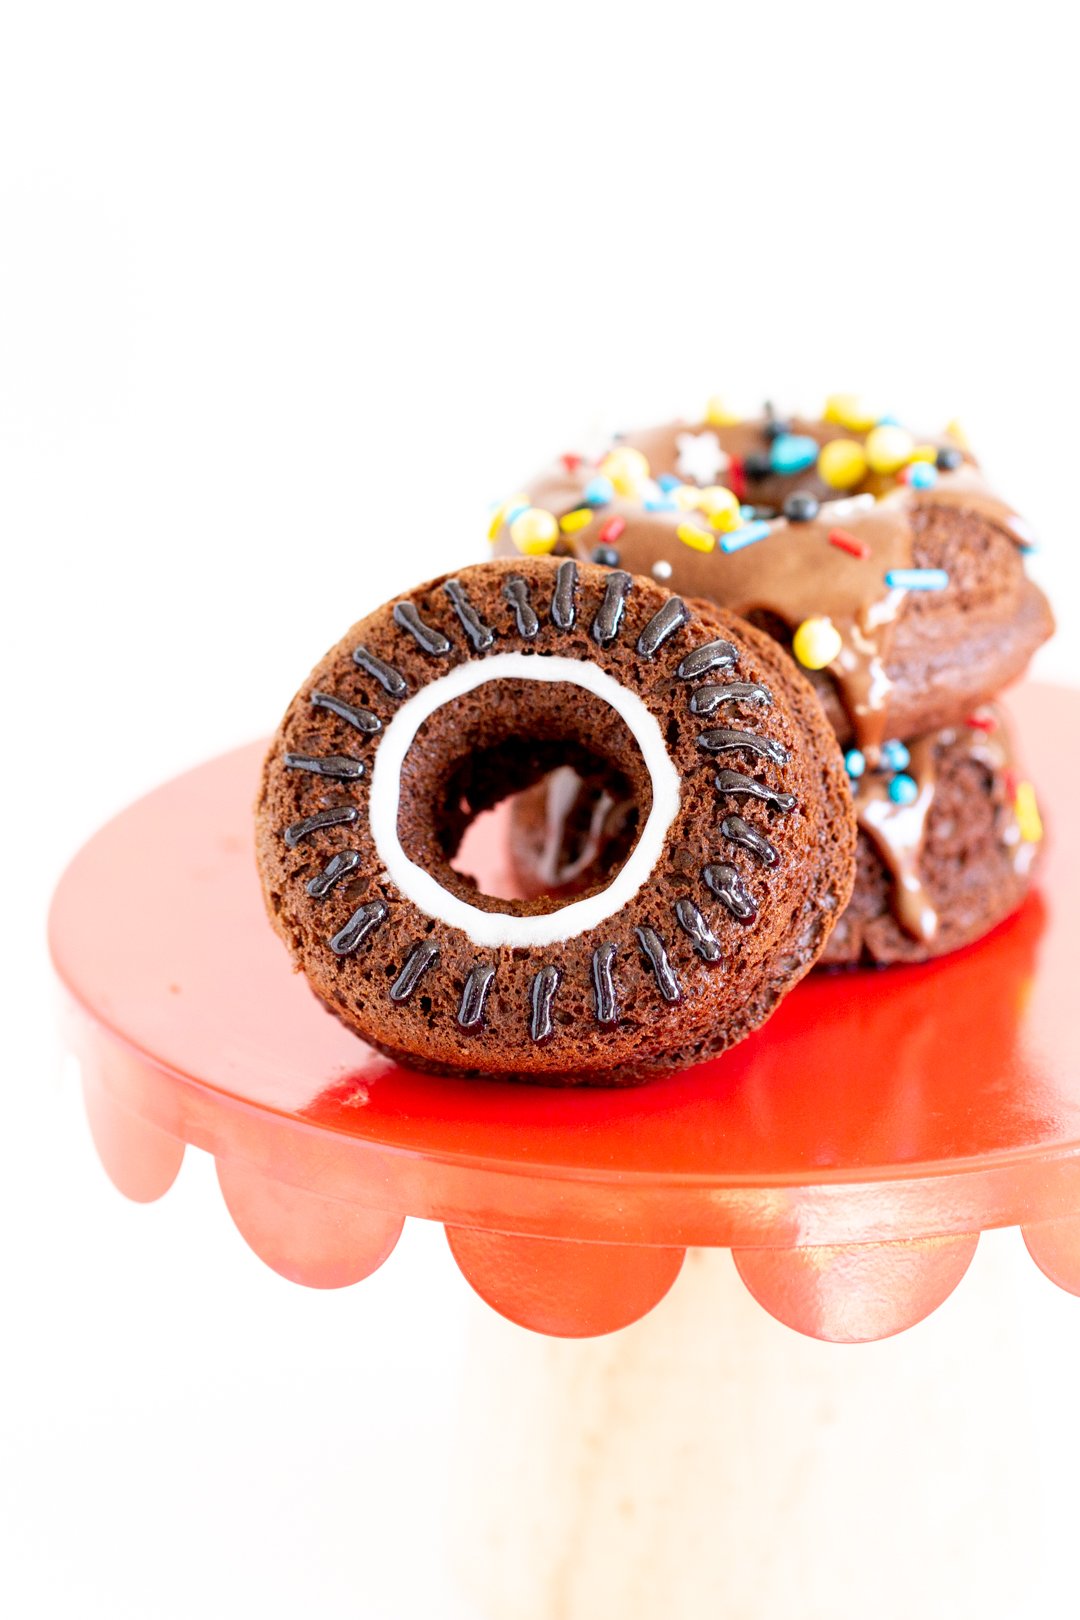 up close view of chocolate wheel donut with black icing for tread